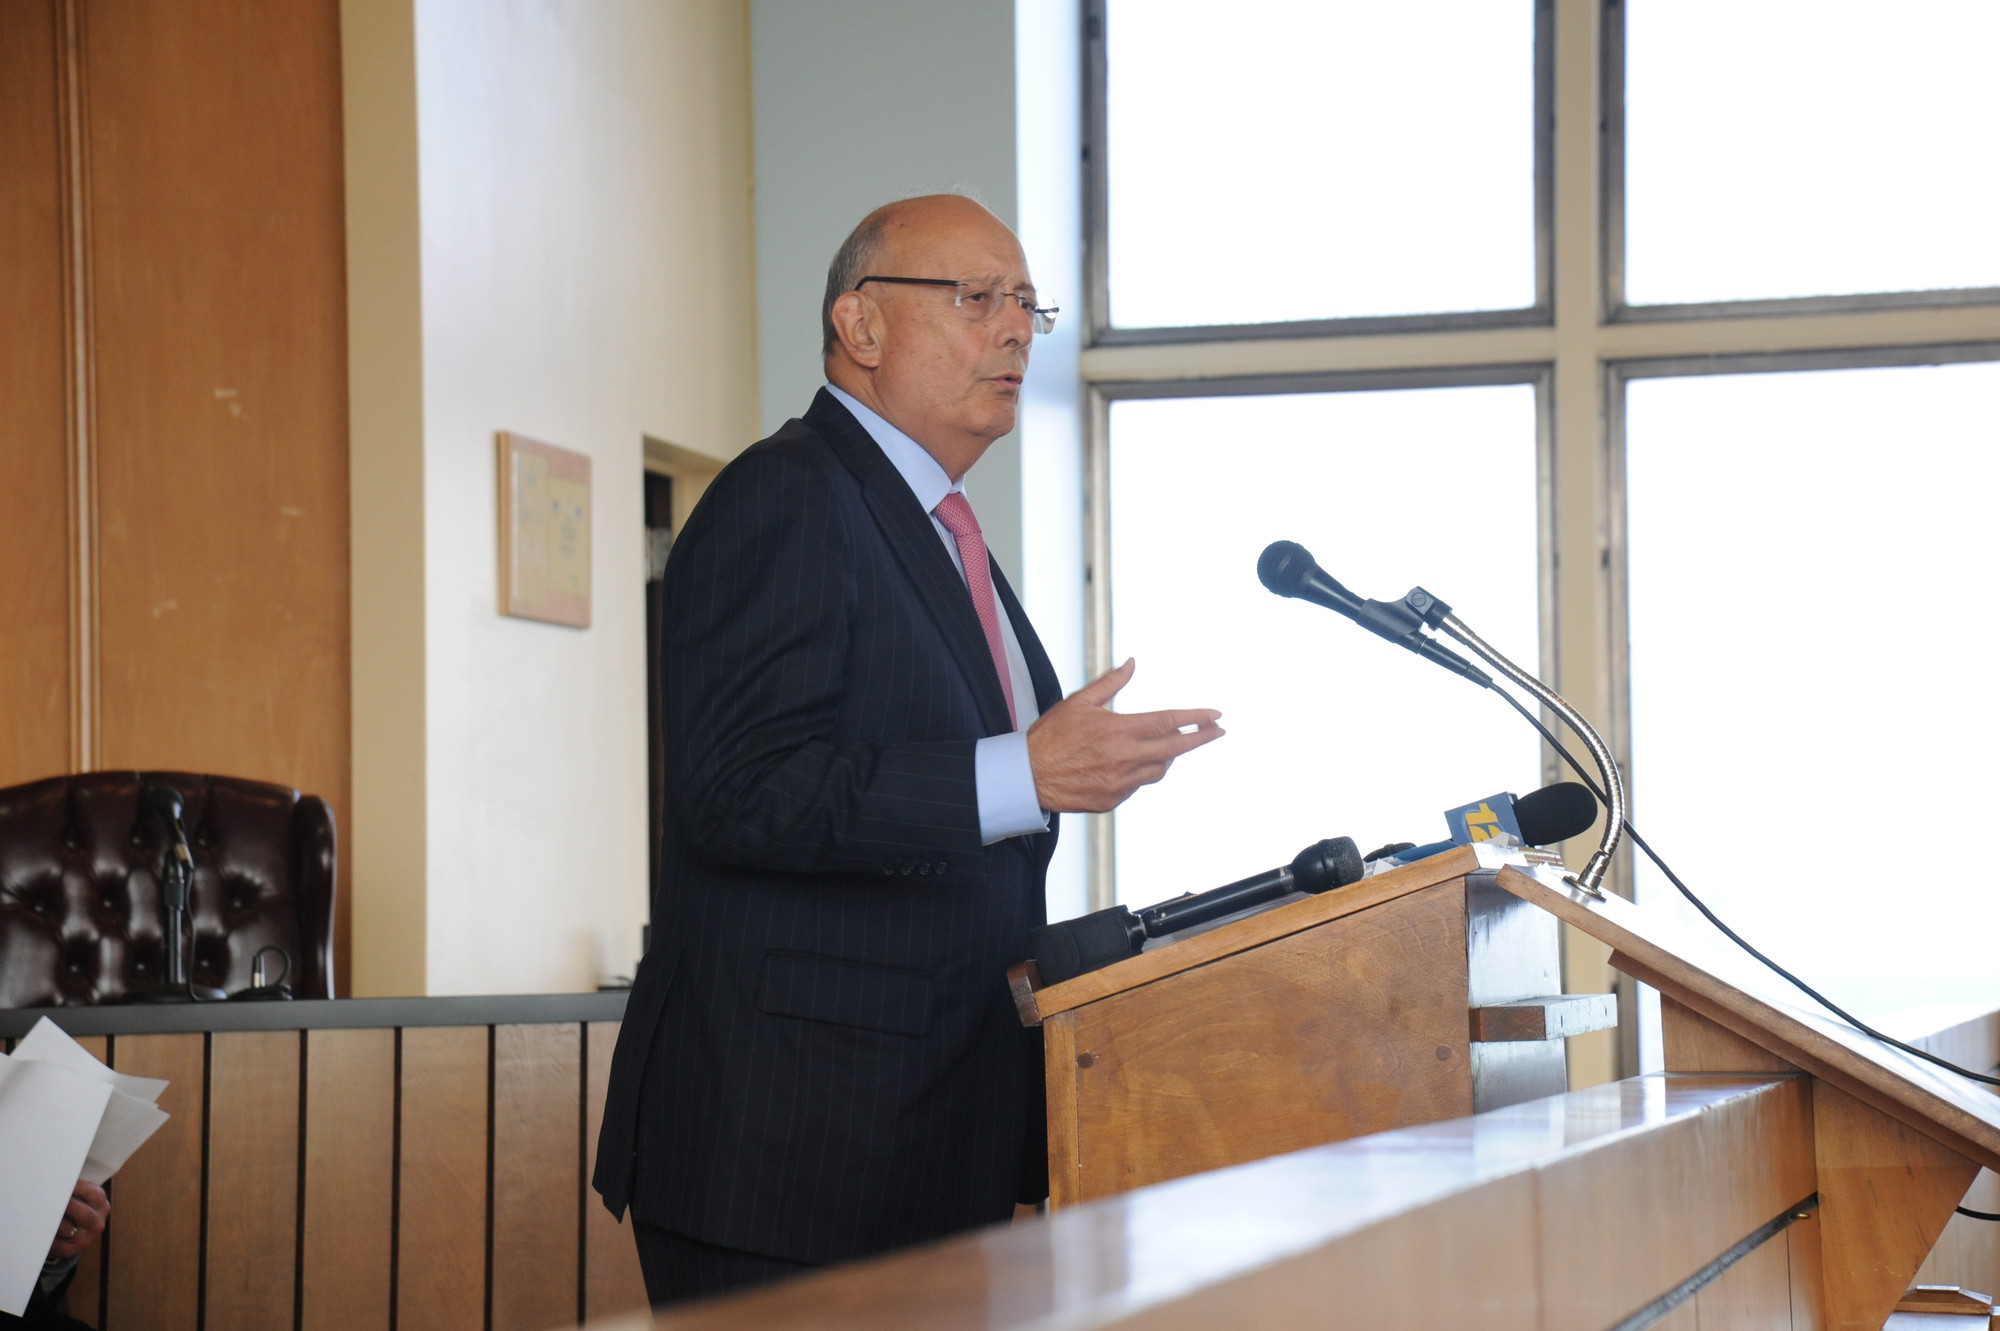 Former U.S. Sen. Al D'Amato called iStar's request for a 25-year tax abatement a "bait and switch."